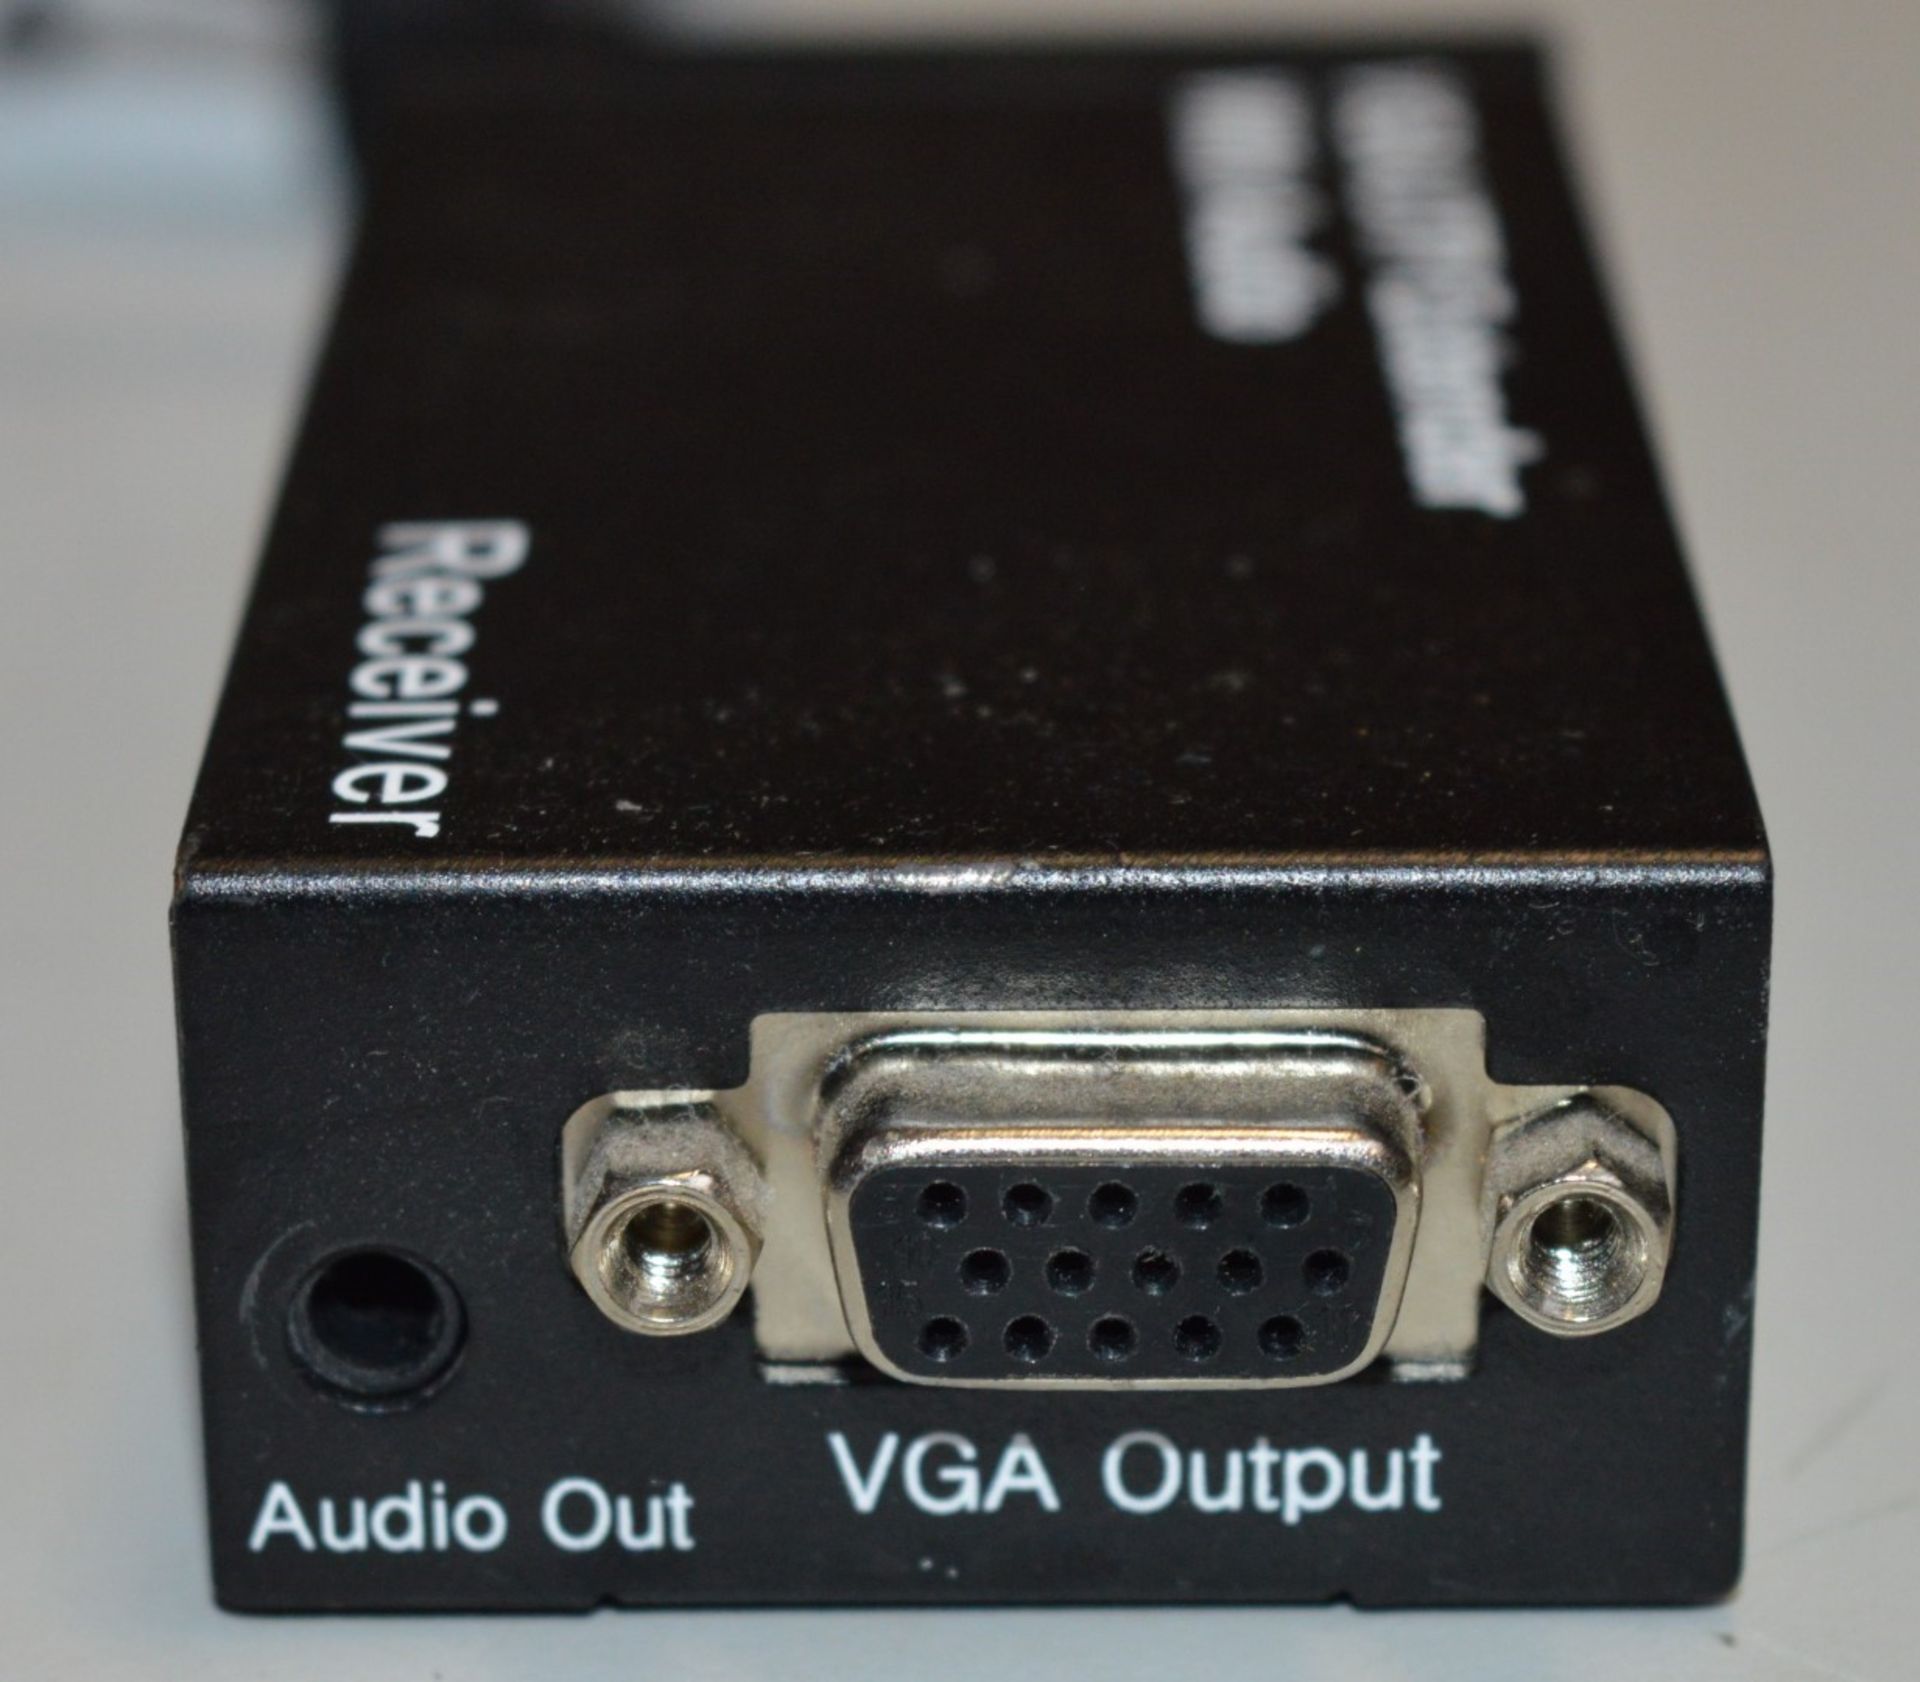 1 x VGA UTP Extender with Audio Receiver Over Cat5 With Power Adaptor - CL290 - Ref J603 - Image 2 of 4